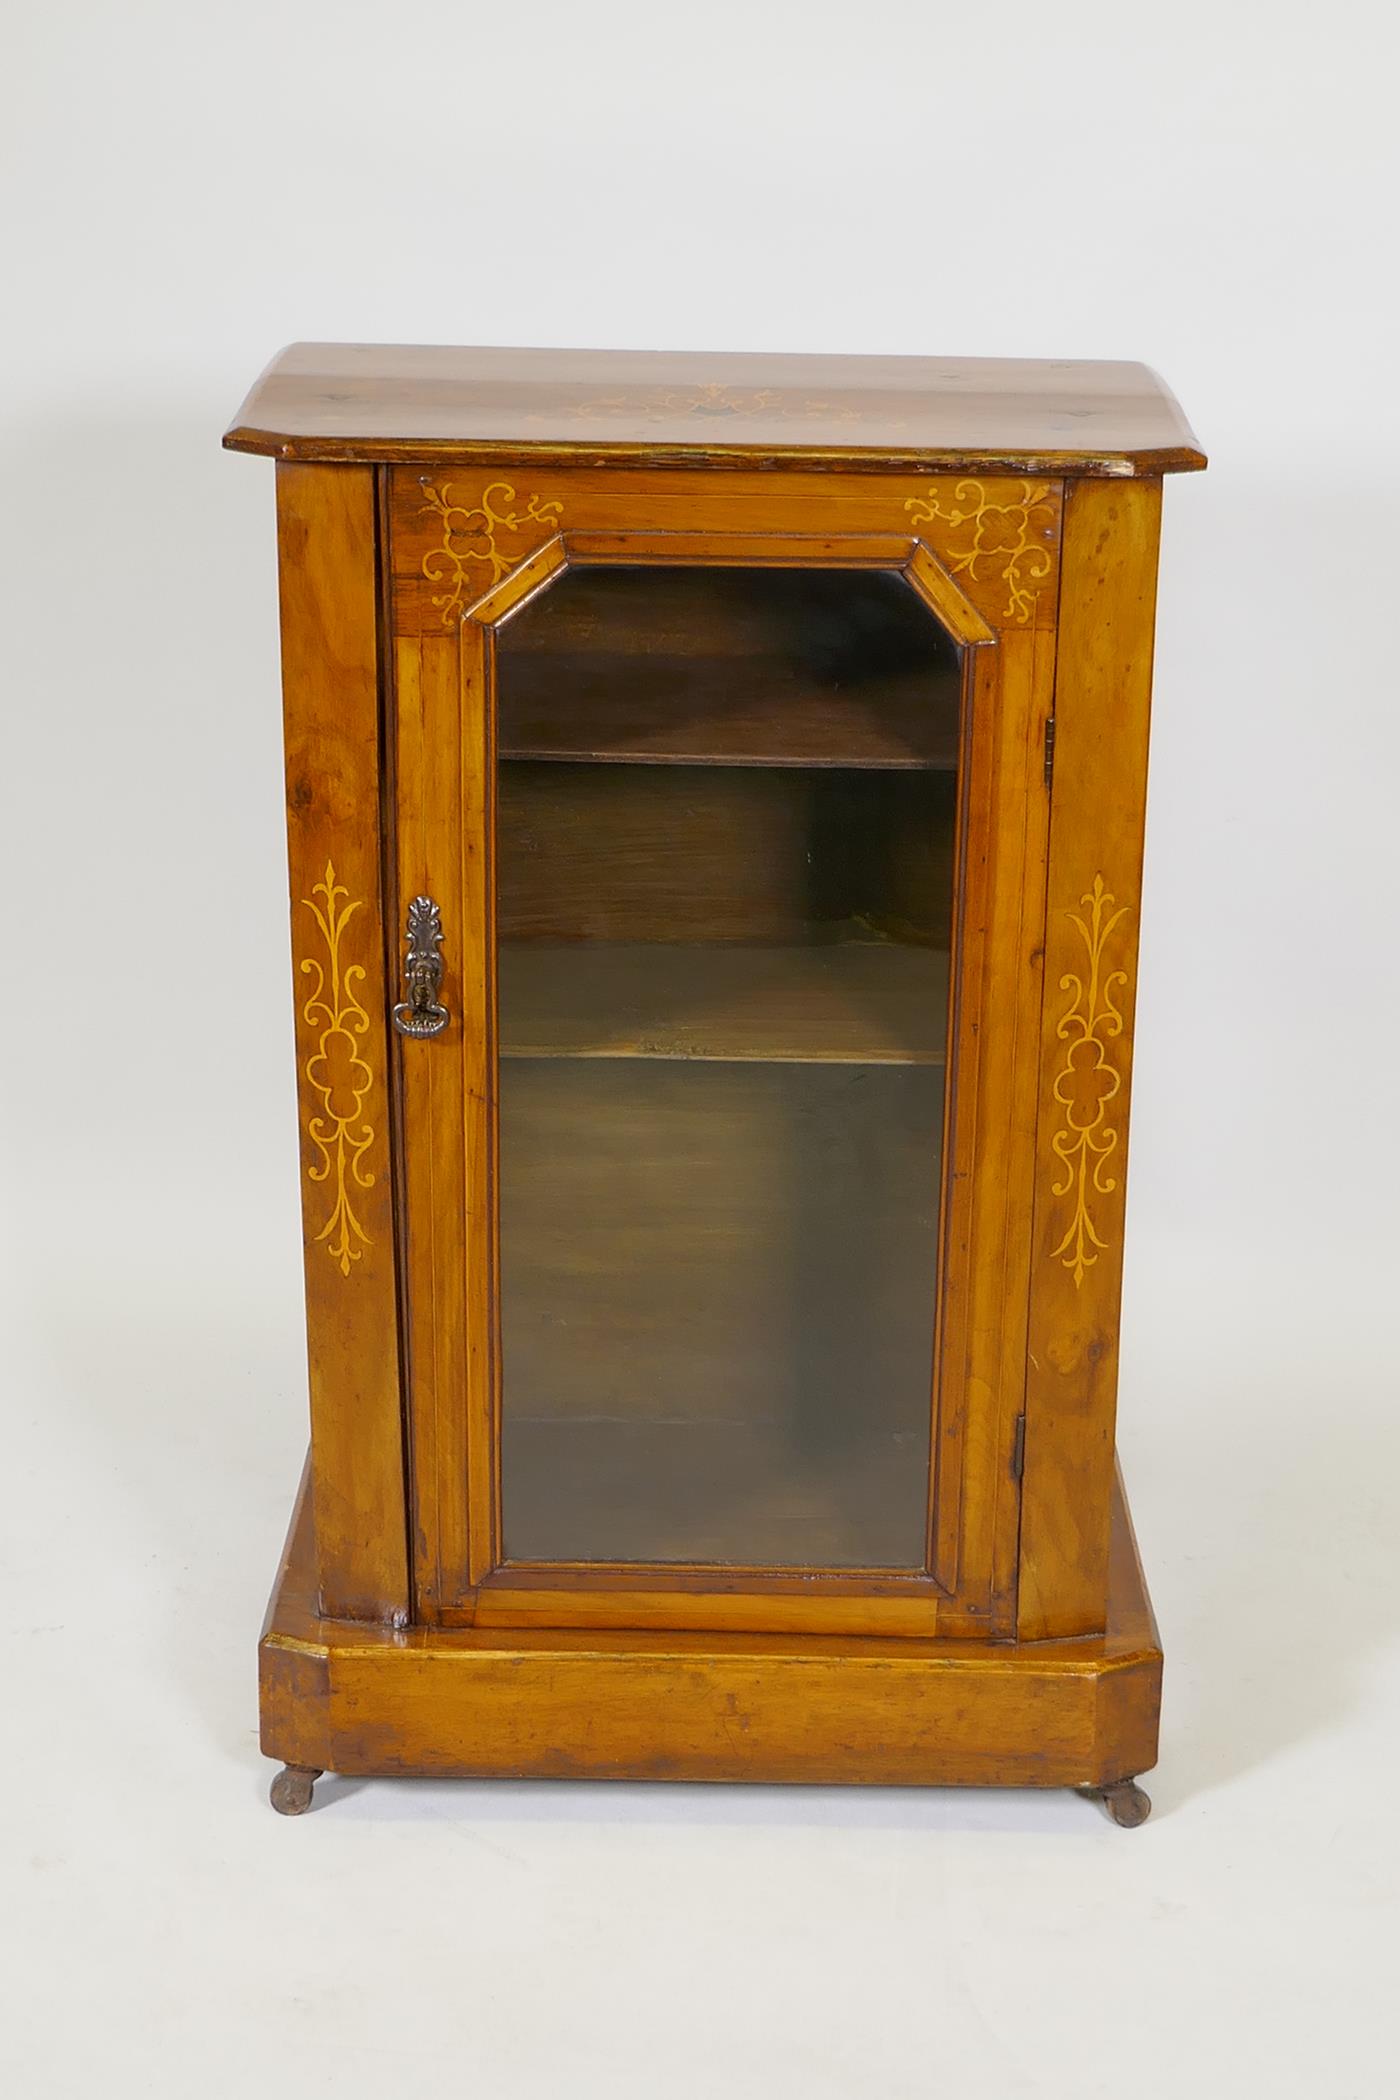 A Victorian inlaid walnut display cabinet with canted corners and single glazed door, raise on a - Image 3 of 5